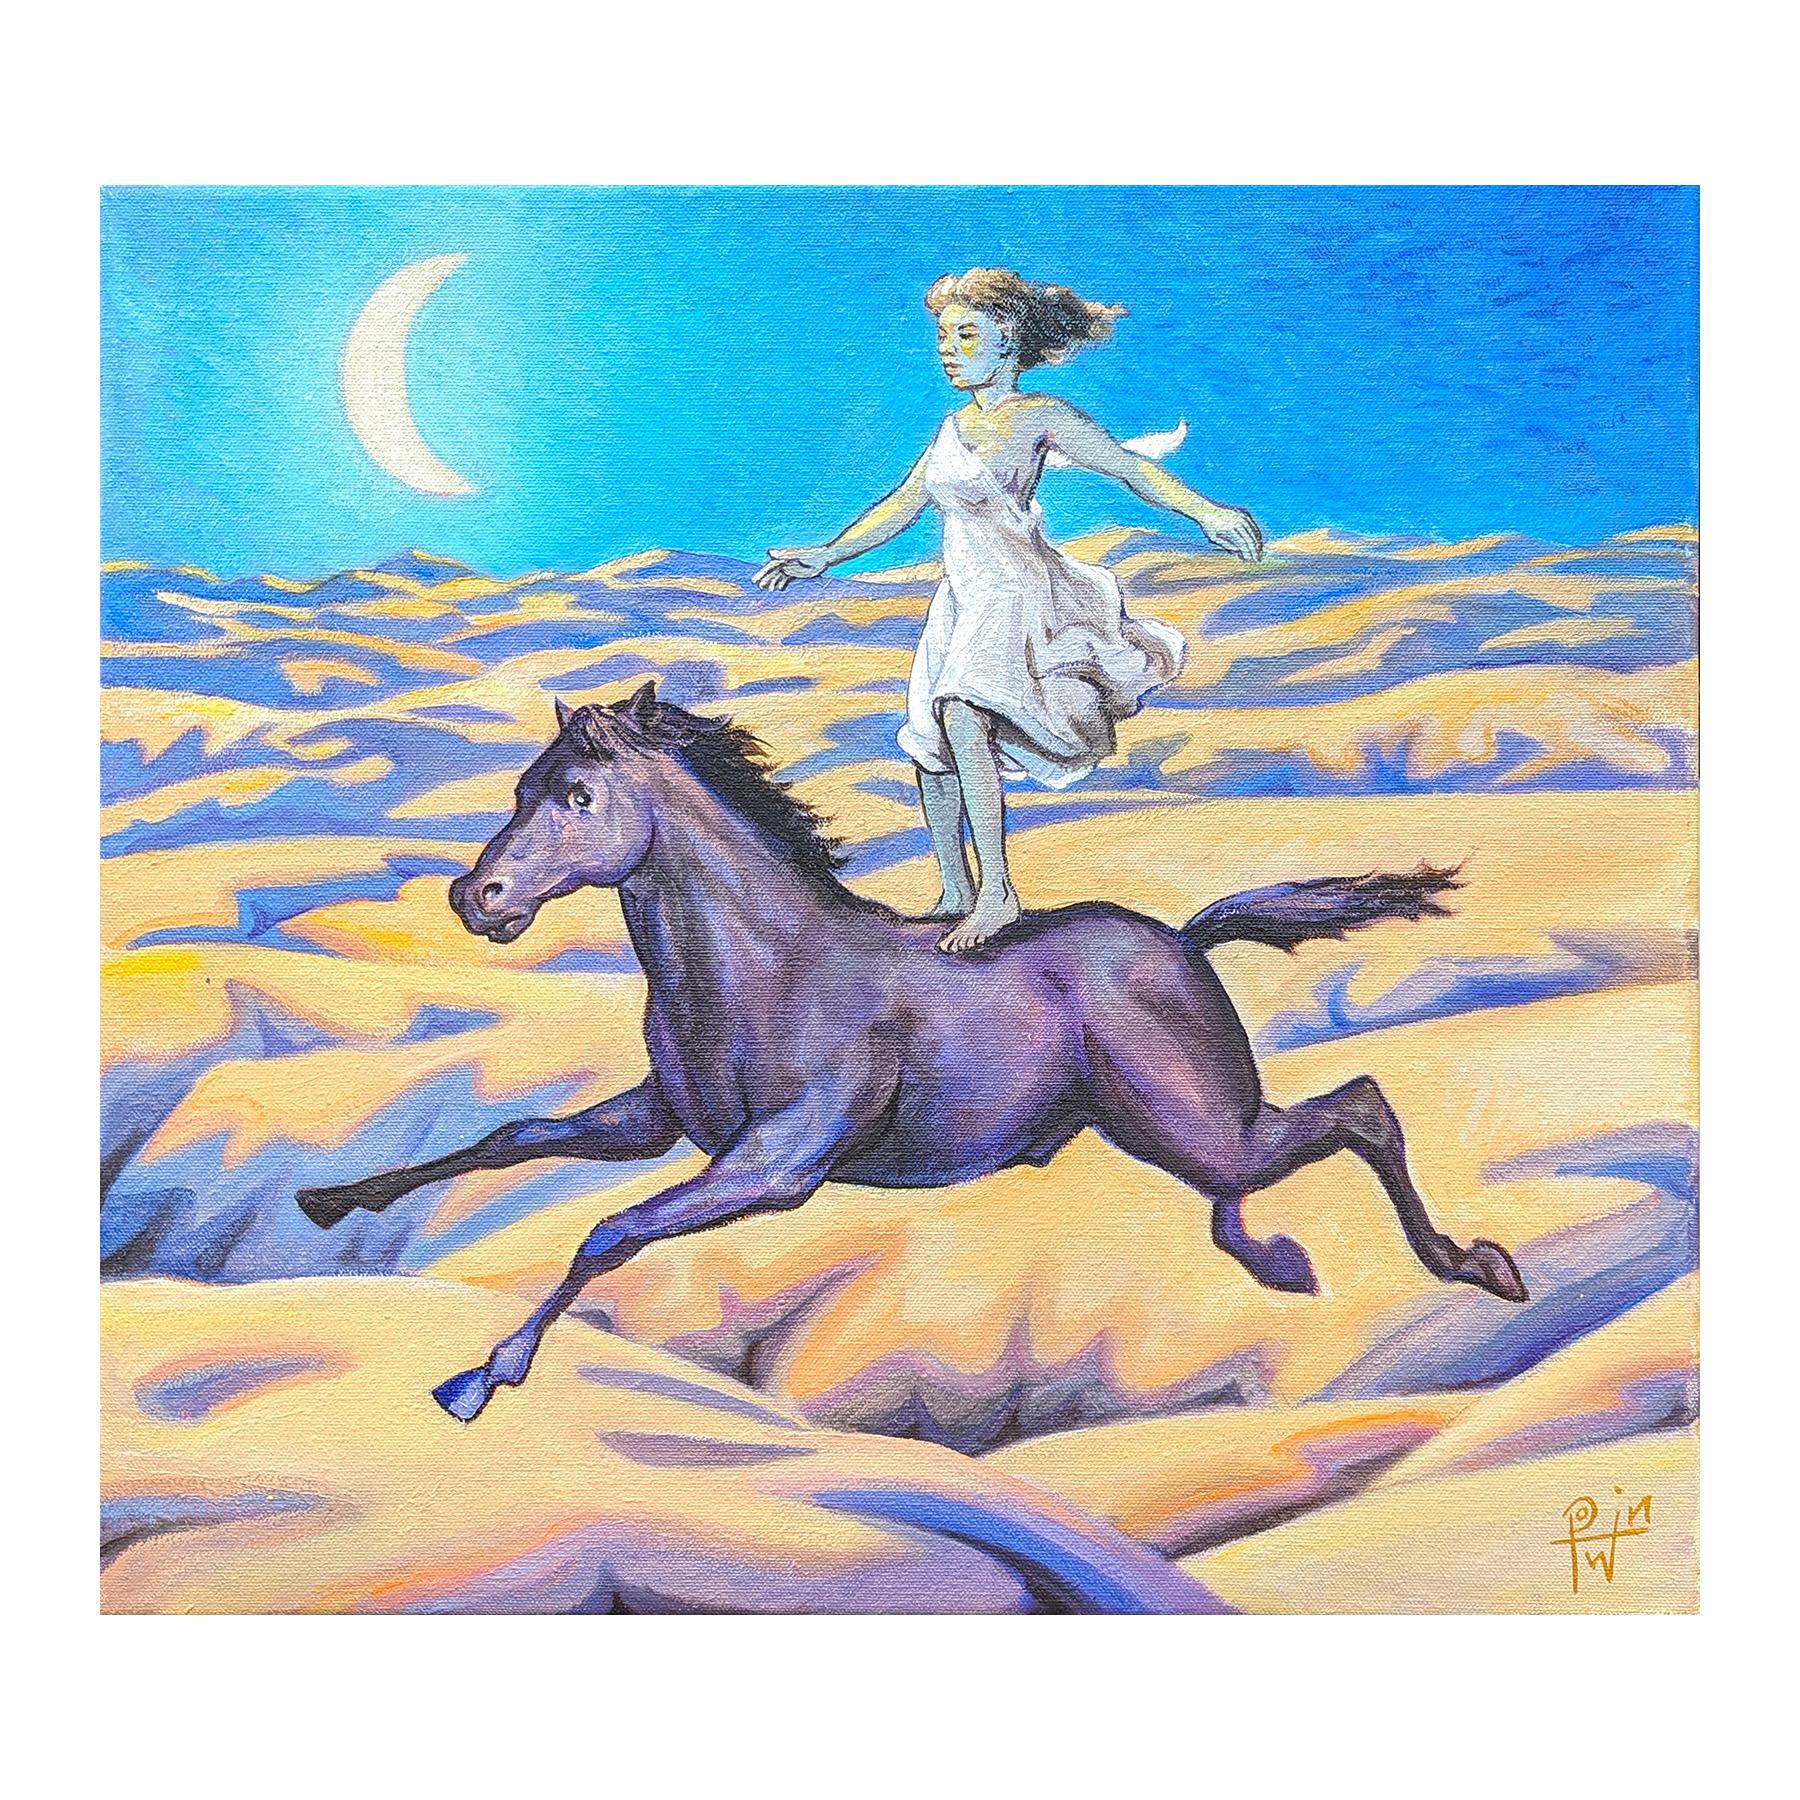 Colorful, blue and yellow toned painting by contemporary artist Henry David Potwin. The work features a woman in a white flowing dress standing on a horse riding through a desert night landscape. Signed in the front lower right corner. Titled and